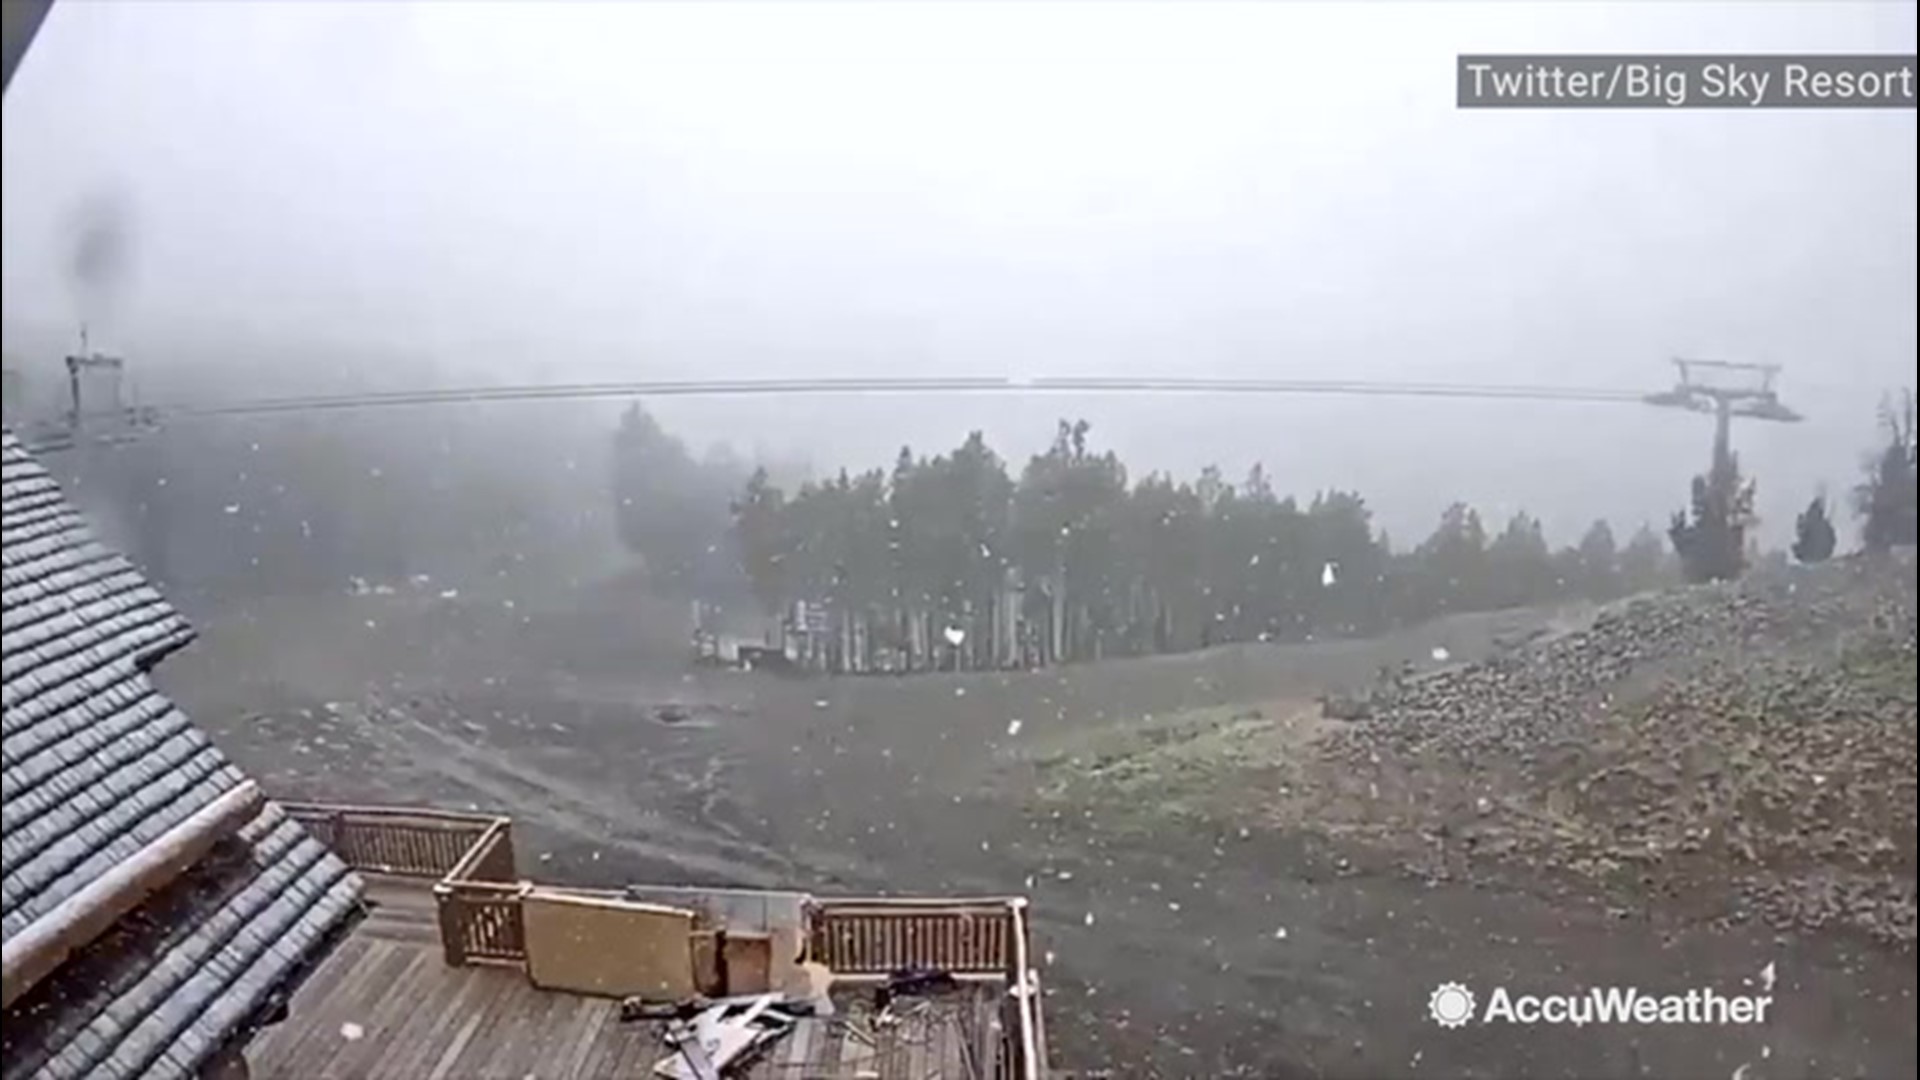 Summer is coming to an end as snow has begun to fall at Big Sky Resort in Big Sky, Montana, on Sept. 20.